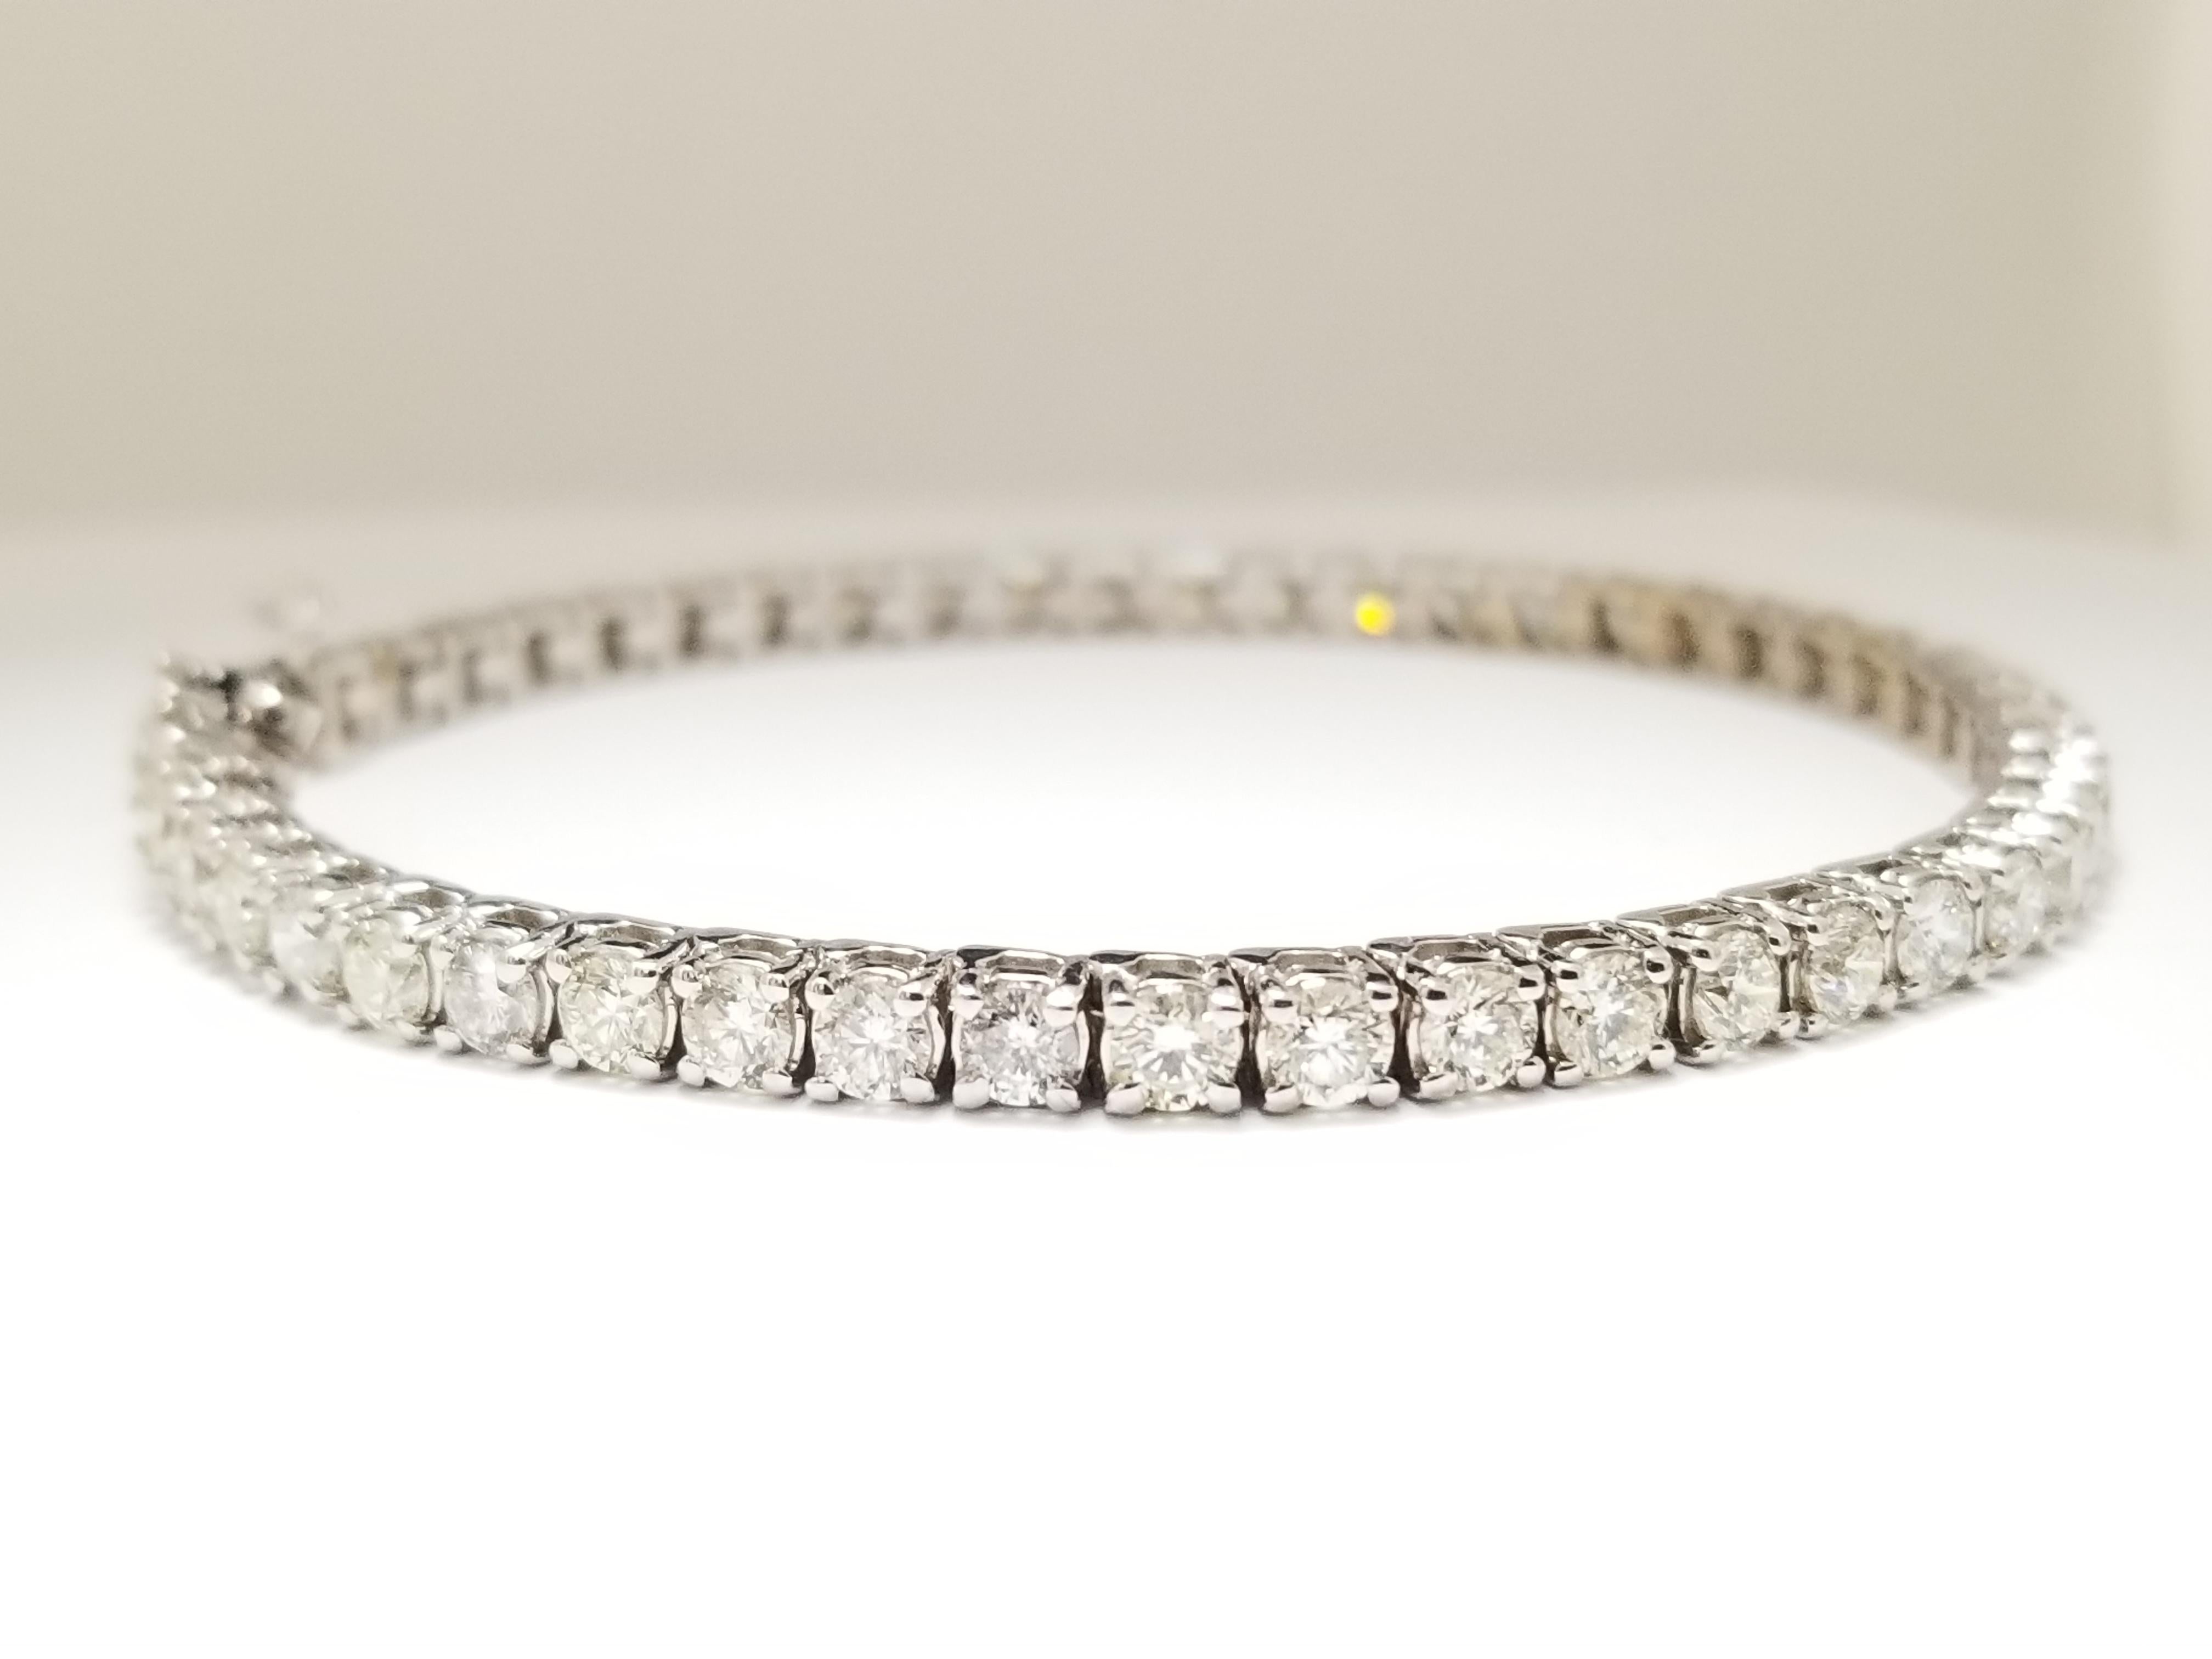 Beautiful diamond tennis bracelet, round-brilliant cut diamonds. set on 14k white gold. each stone is set in a classic four-prong style for maximum light brilliance. Every day style. Extraordinary elegance. 7 inch length. Average Color I , Clarity